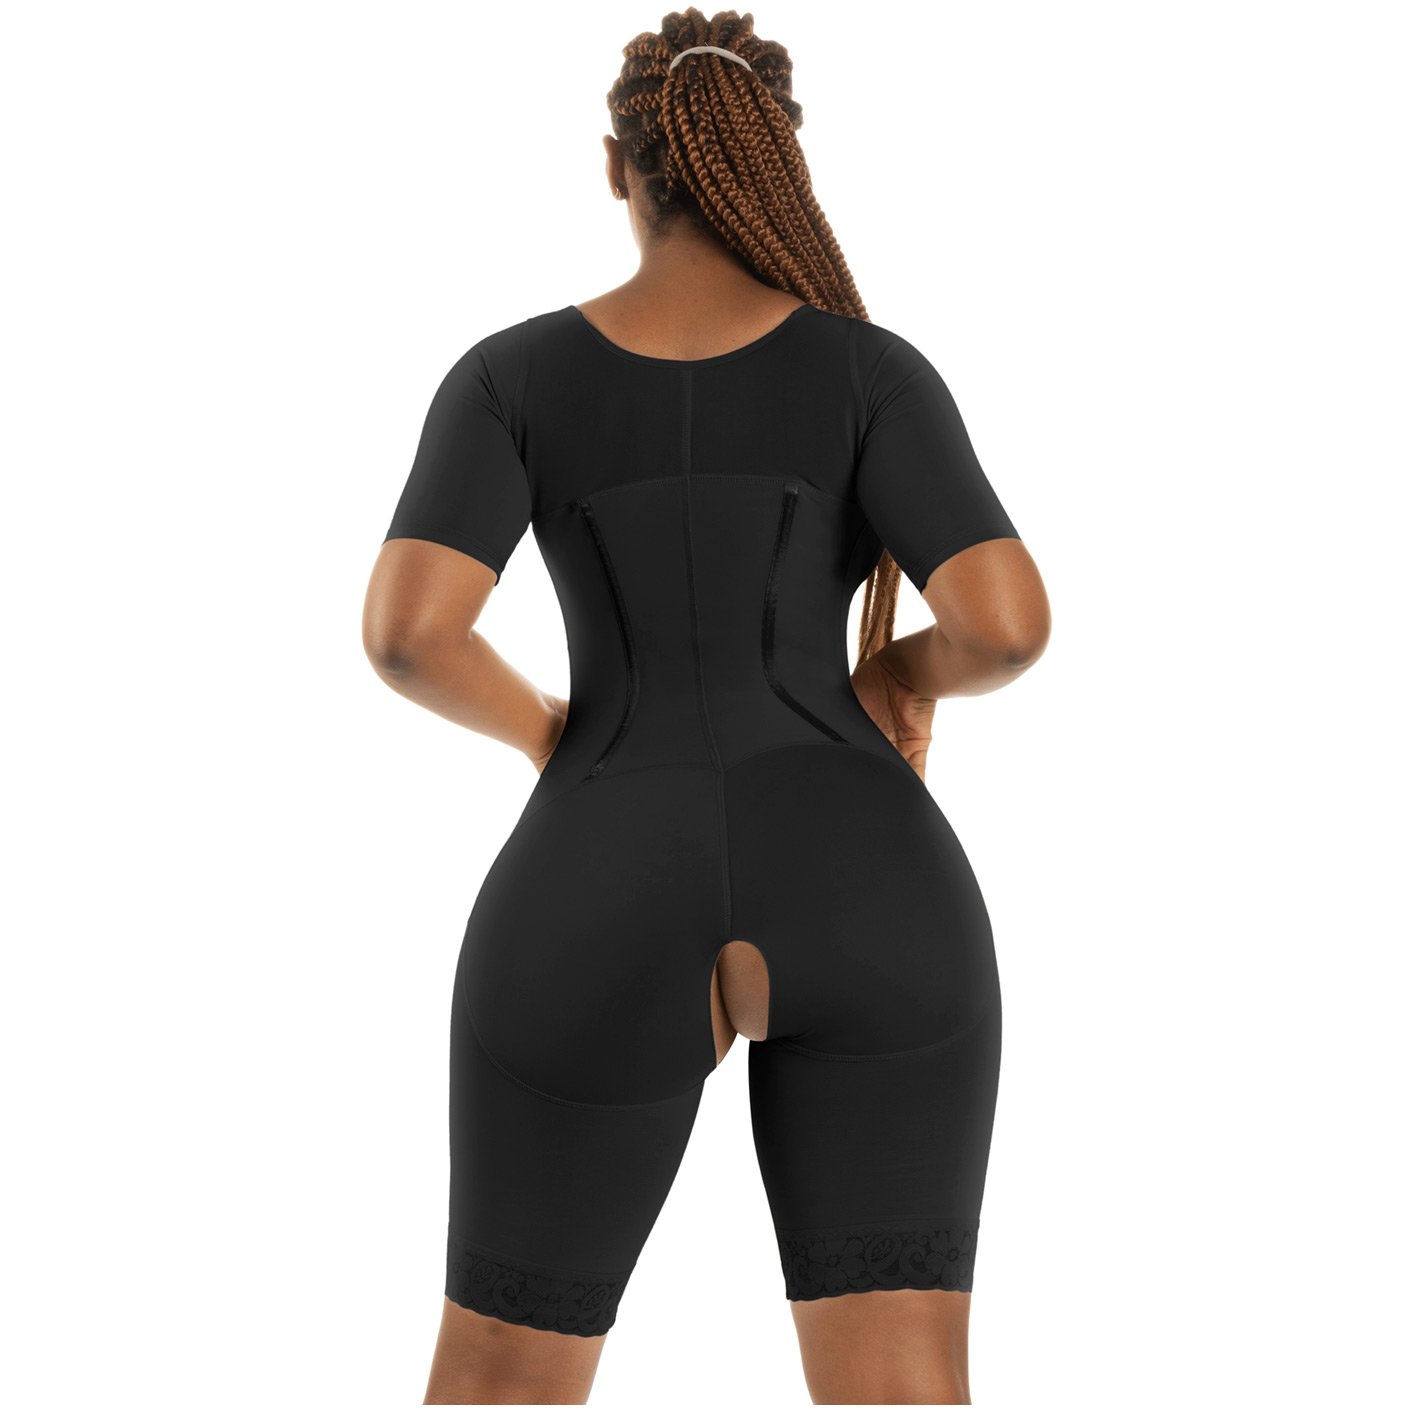 Bling Shapers 938BF | Stratchable Shapewear Bodysuit | Full Body Shaper with Sleeves | 3 in 1 Best Post Surgery Firm Control Women Garment - fajacolombian